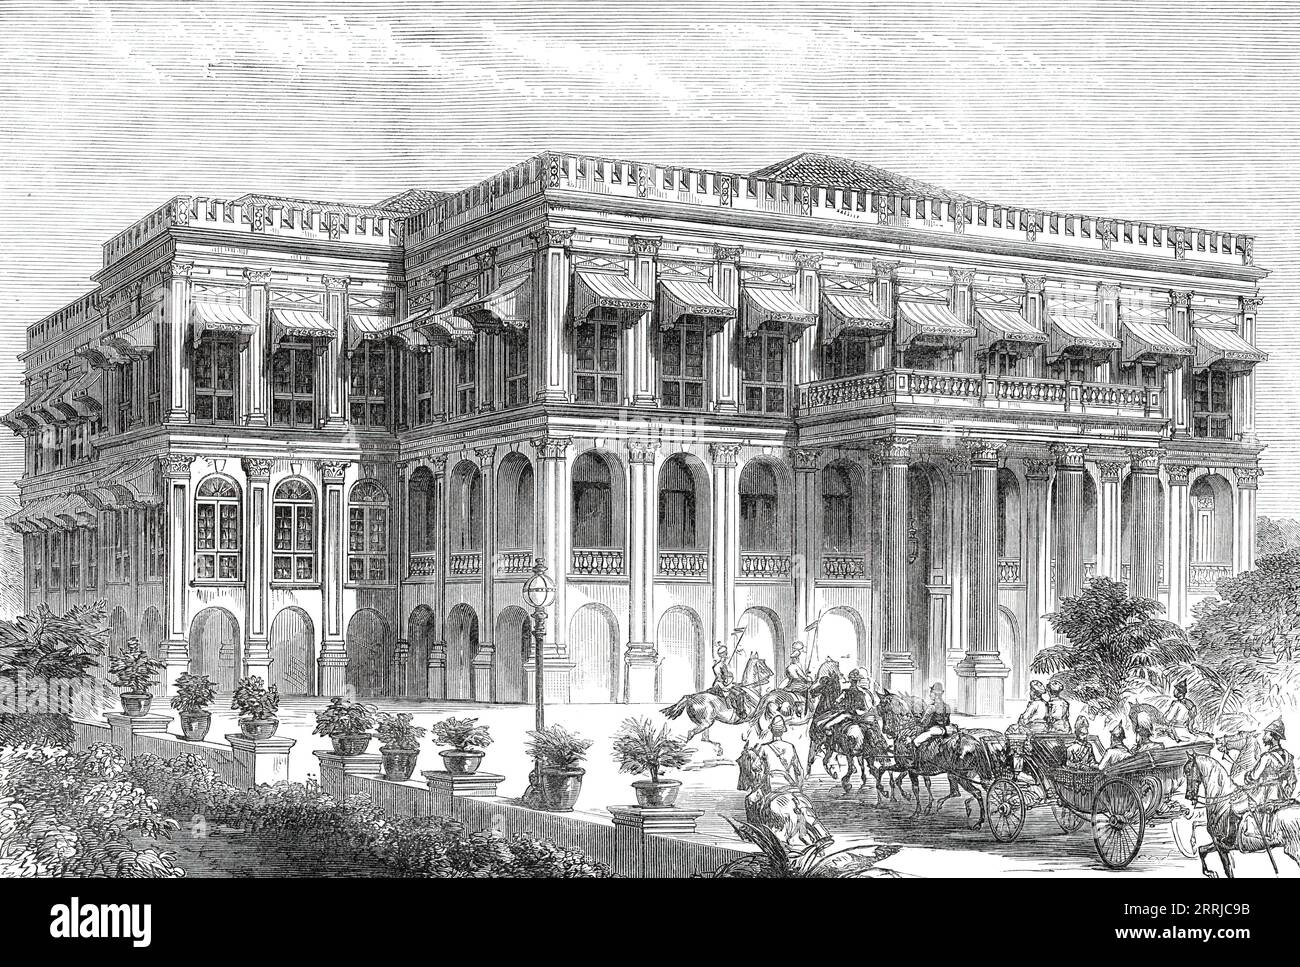 Visit of the Prince of Wales to Sans Souci, Bombay, from a sketch by one of our special artists, 1876. The future King Edward VII in India: '...the Prince's sojourn at Bombay. He and his party visited Lady Sassoon at Sans Souci, the mansion of Sir Albert Sassoon...the scene when his Royal Highness arrived at the villa'. From &quot;Illustrated London News&quot;, 1876. Stock Photo